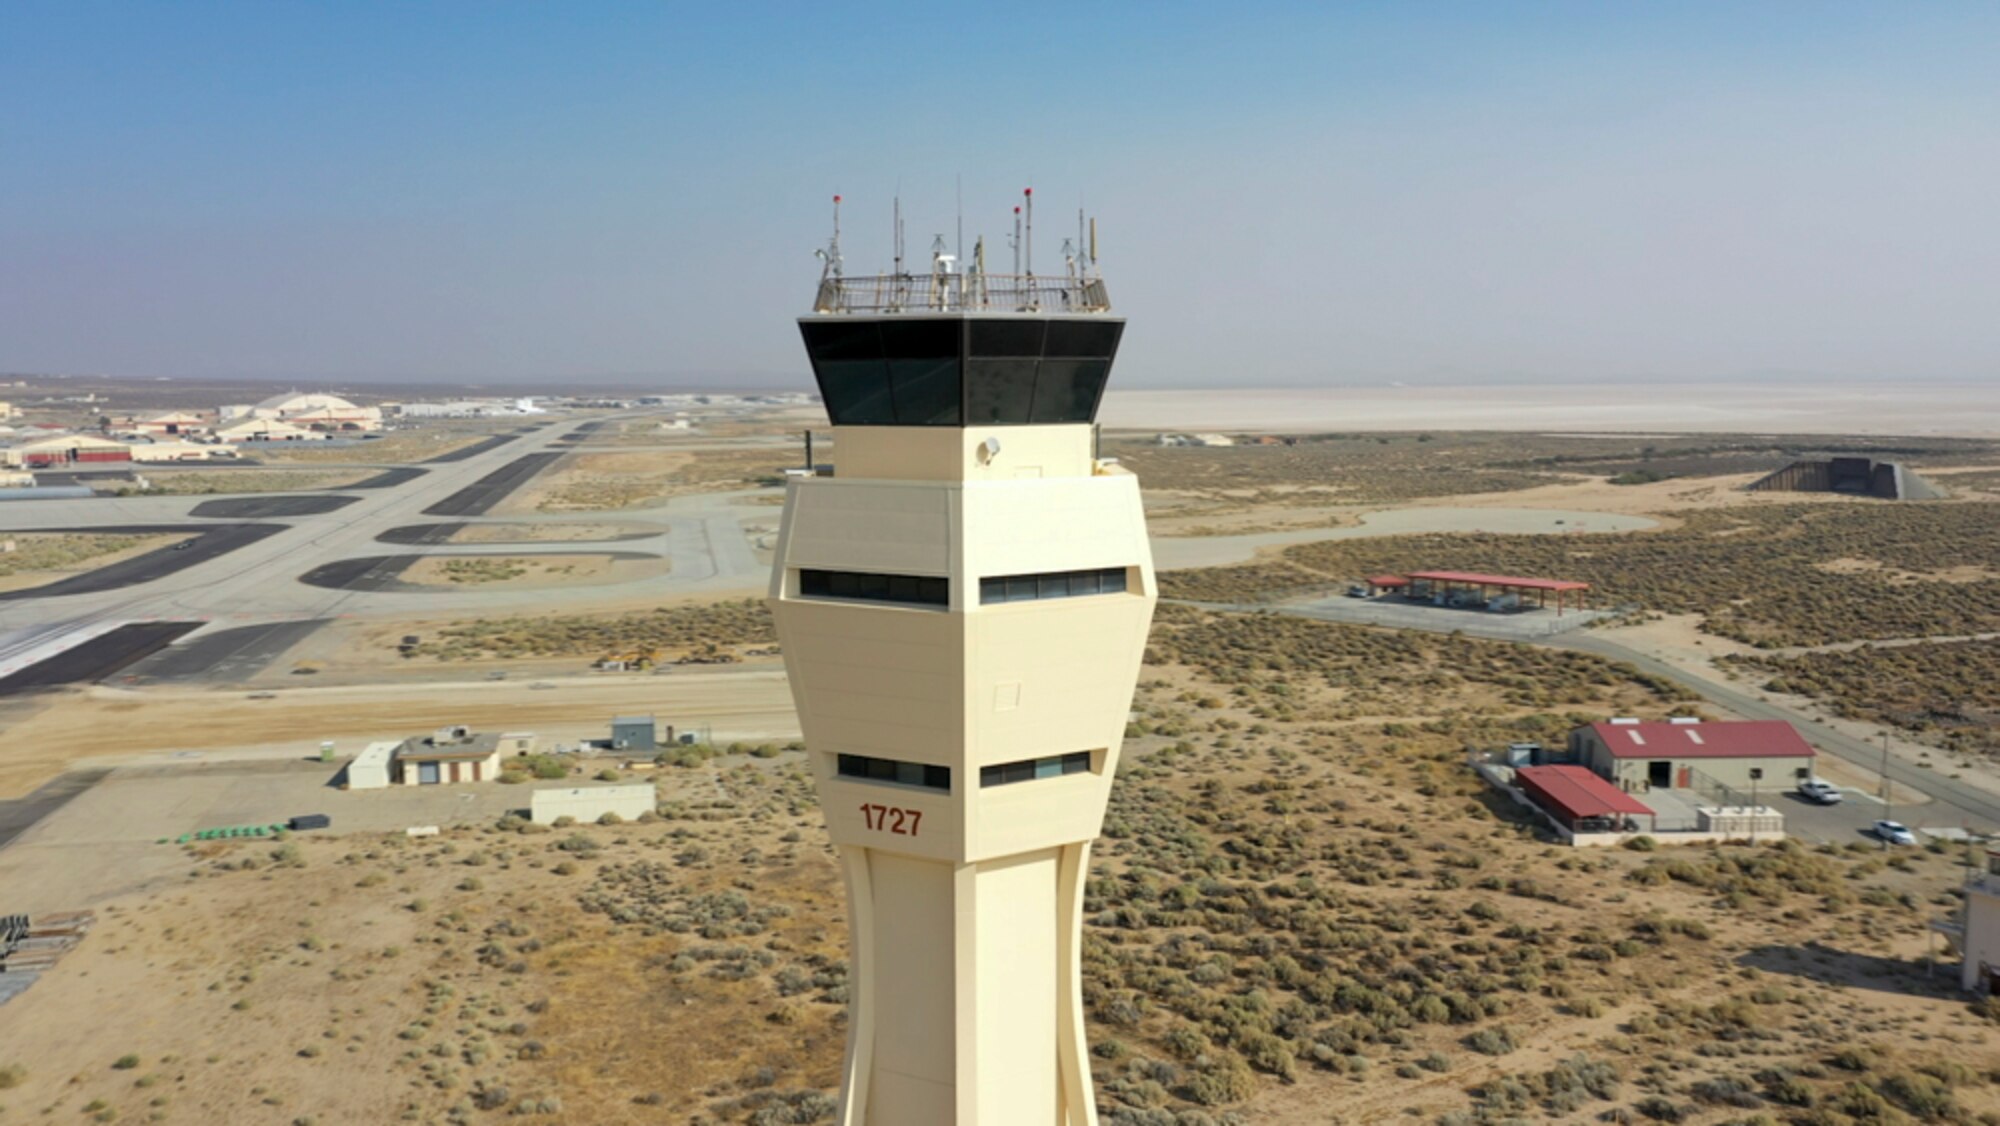 Continuing on our series "No Line Between Us", we show how civilians and active duty work shoulder-to-shoulder for the mission in Air Traffic Control on Edwards AFB.